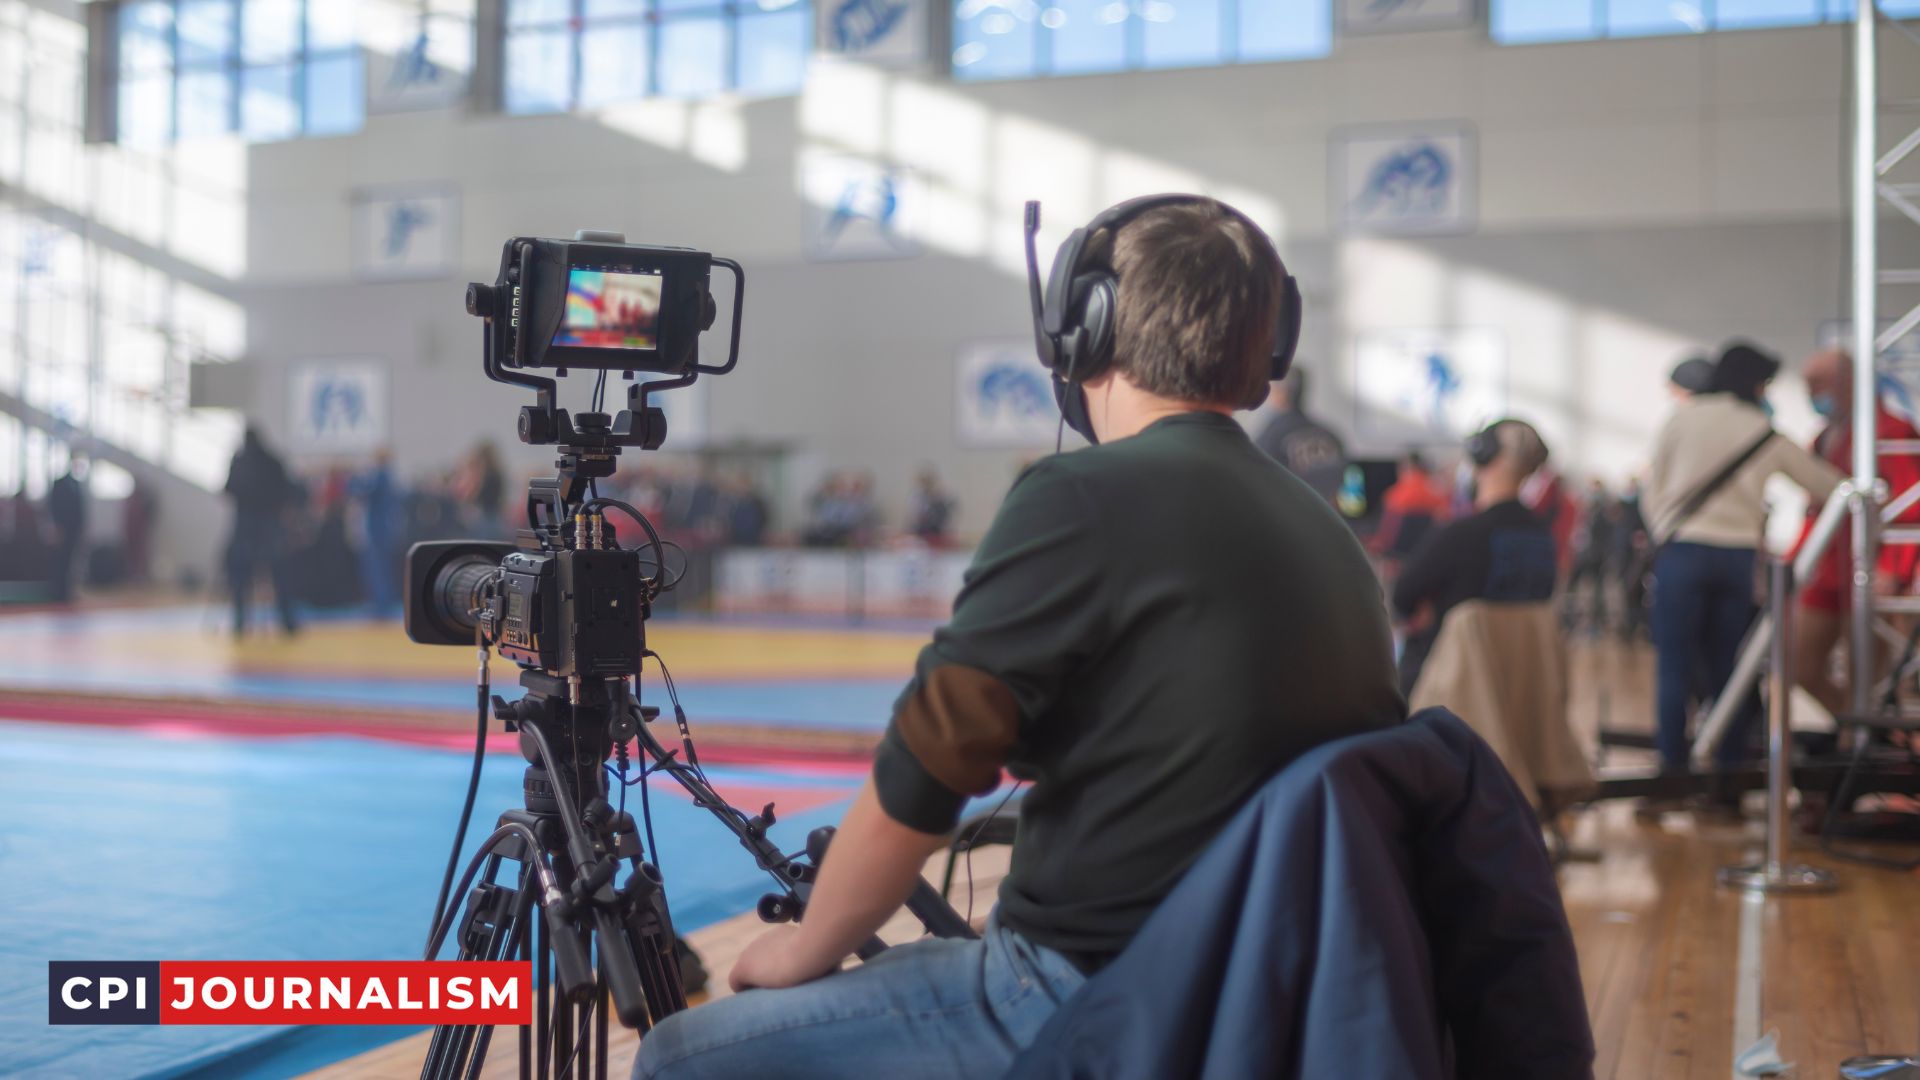 Sports Journalists Use Live Streaming To Enhance Their Coverage Of Events